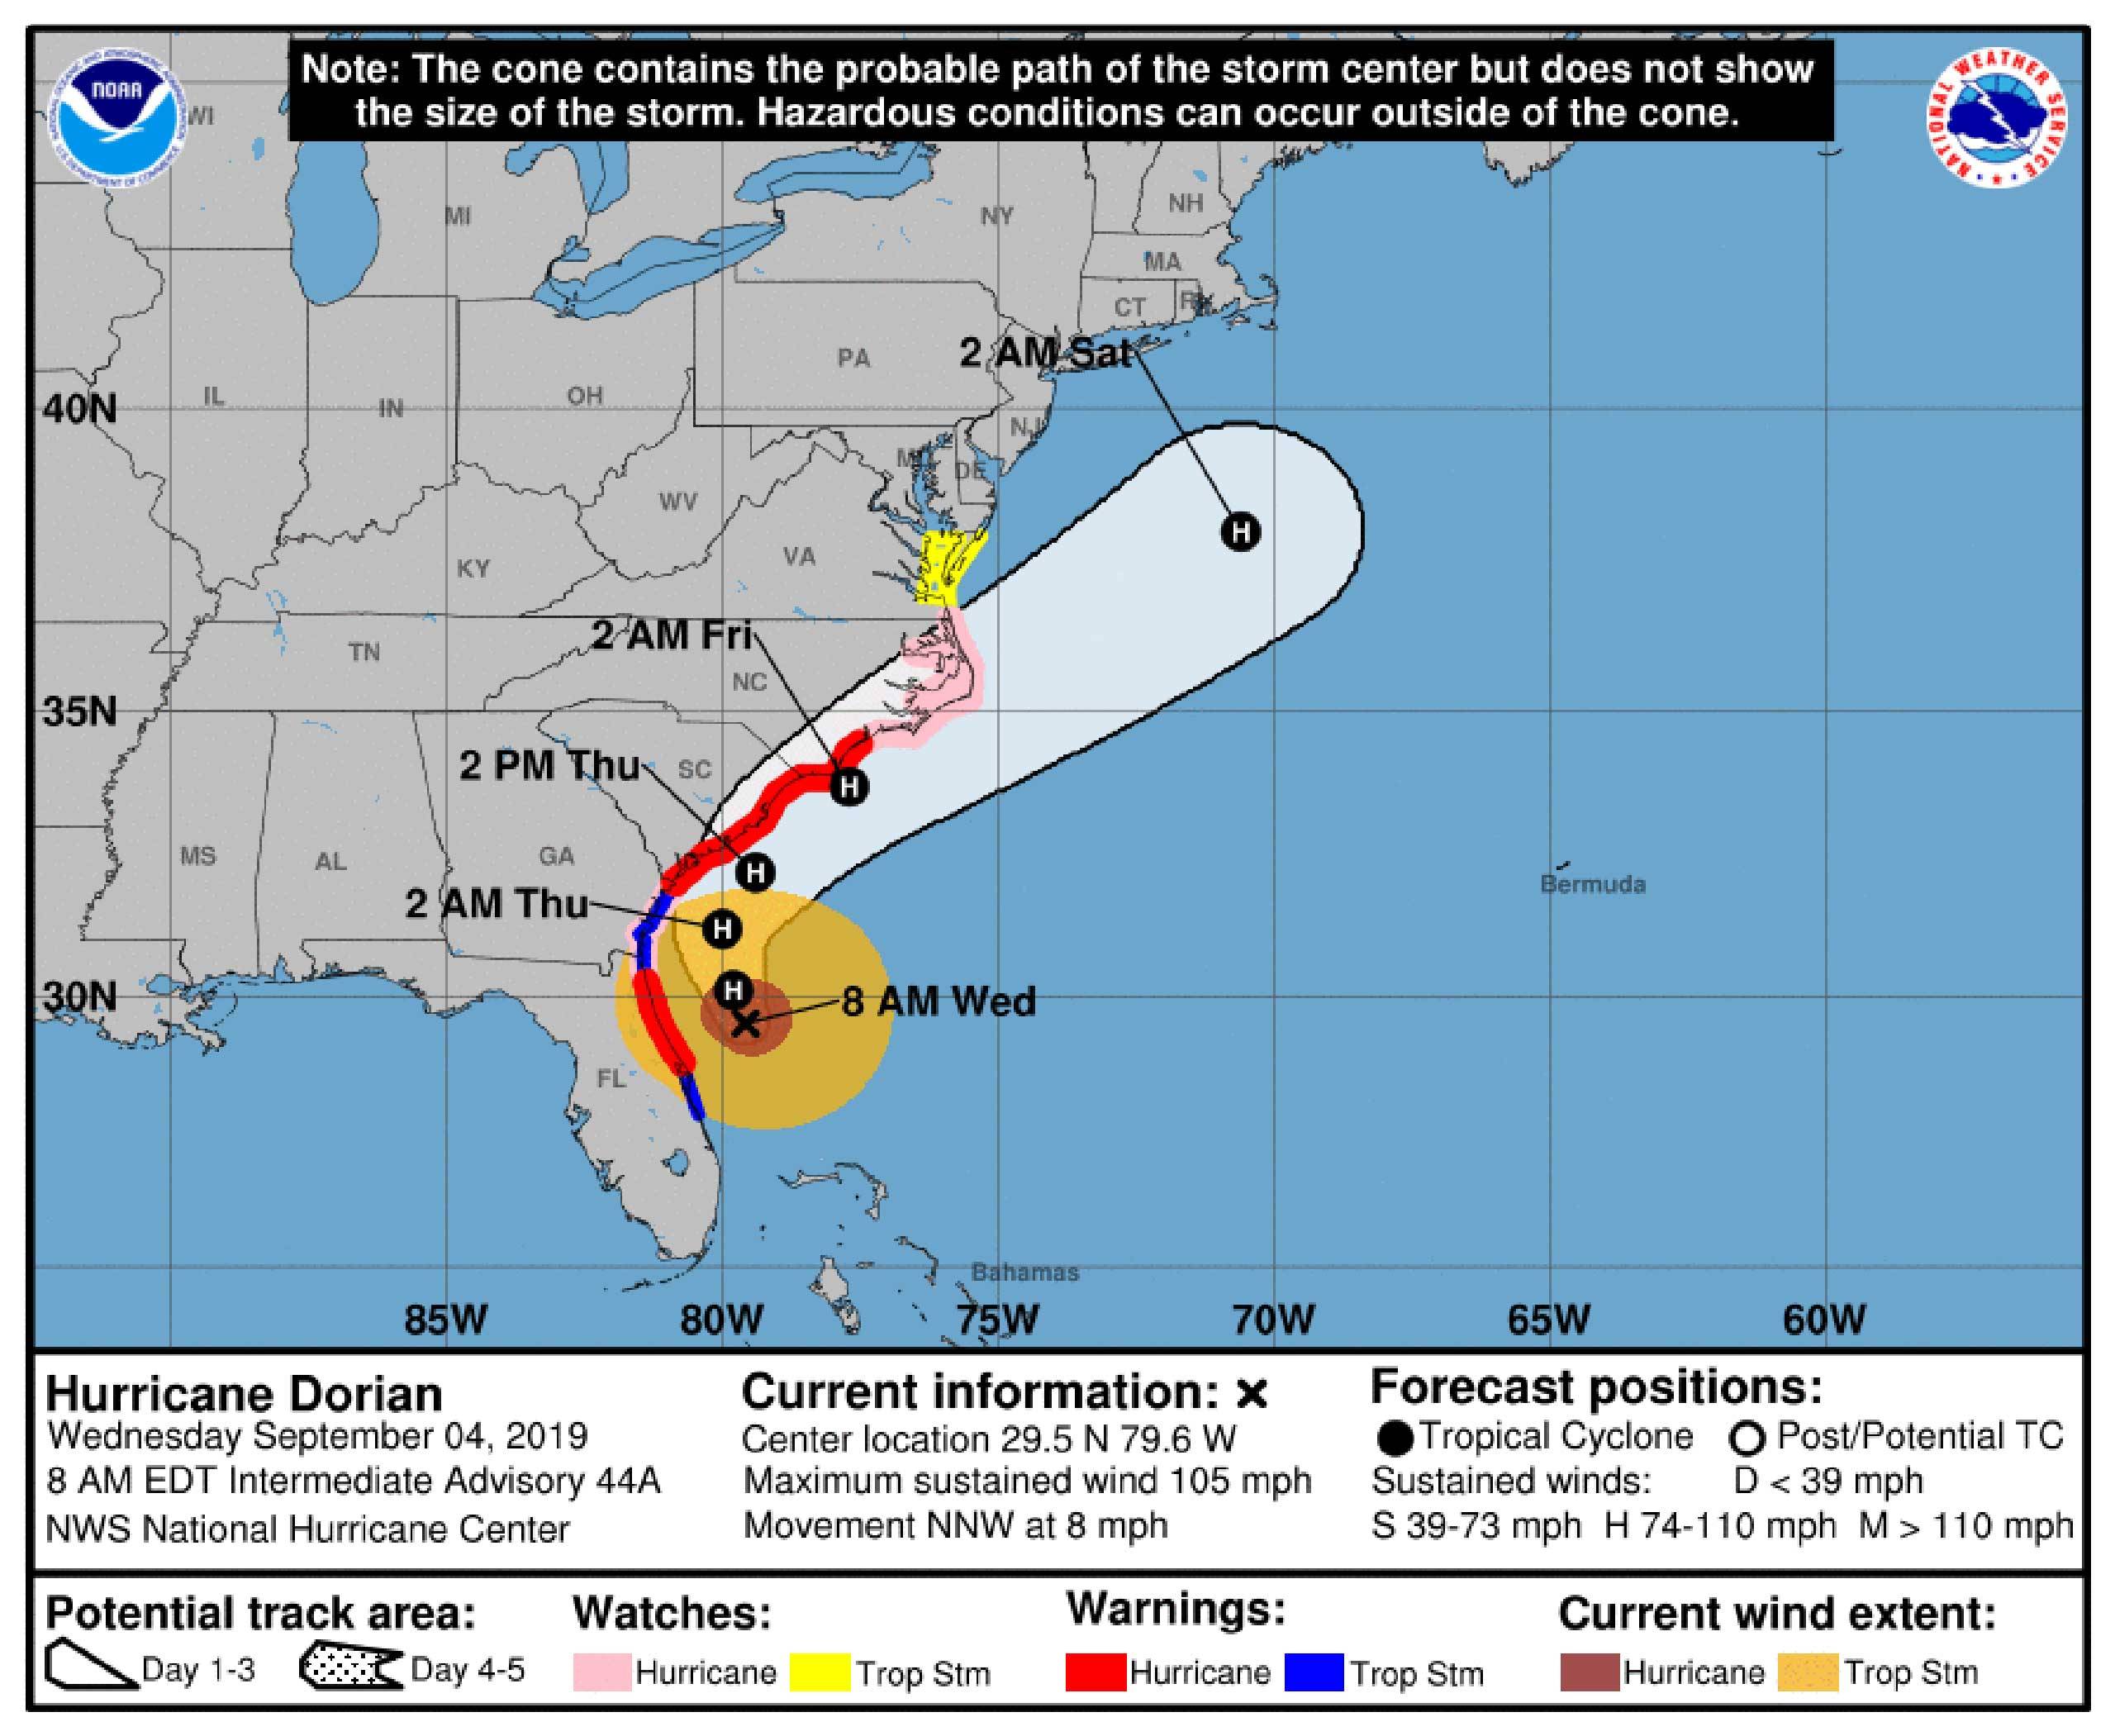 Governor Ron DeSantis declares State of Emergency for much of Florida due to Hurricane Dorian